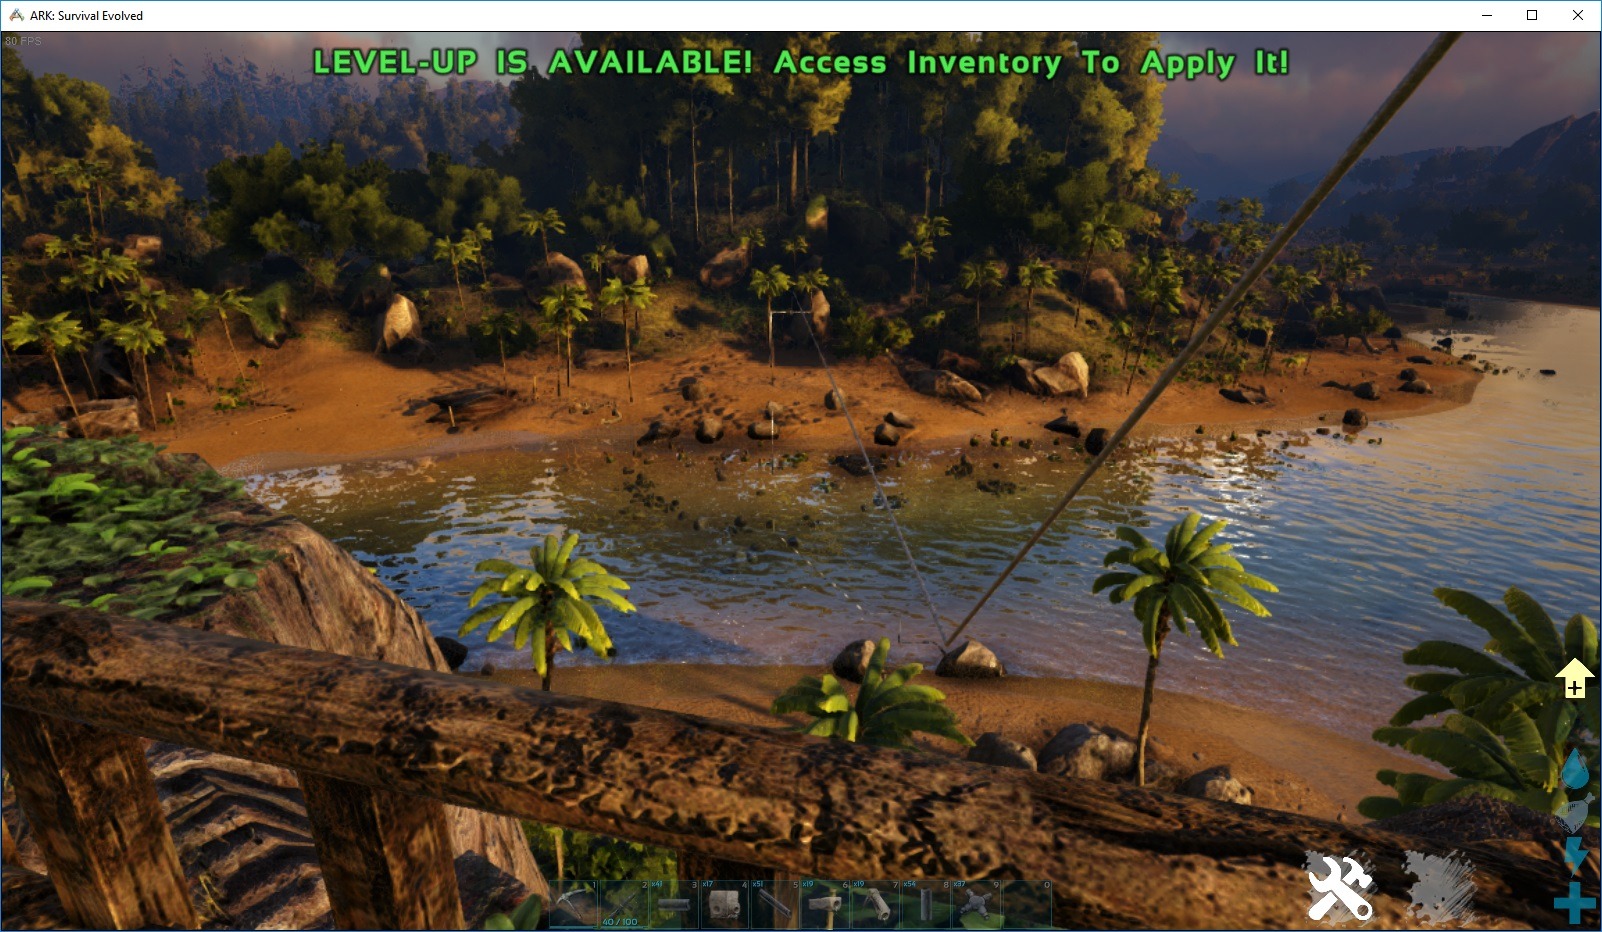 Securing Food and Water In ARK: Survival Evolved